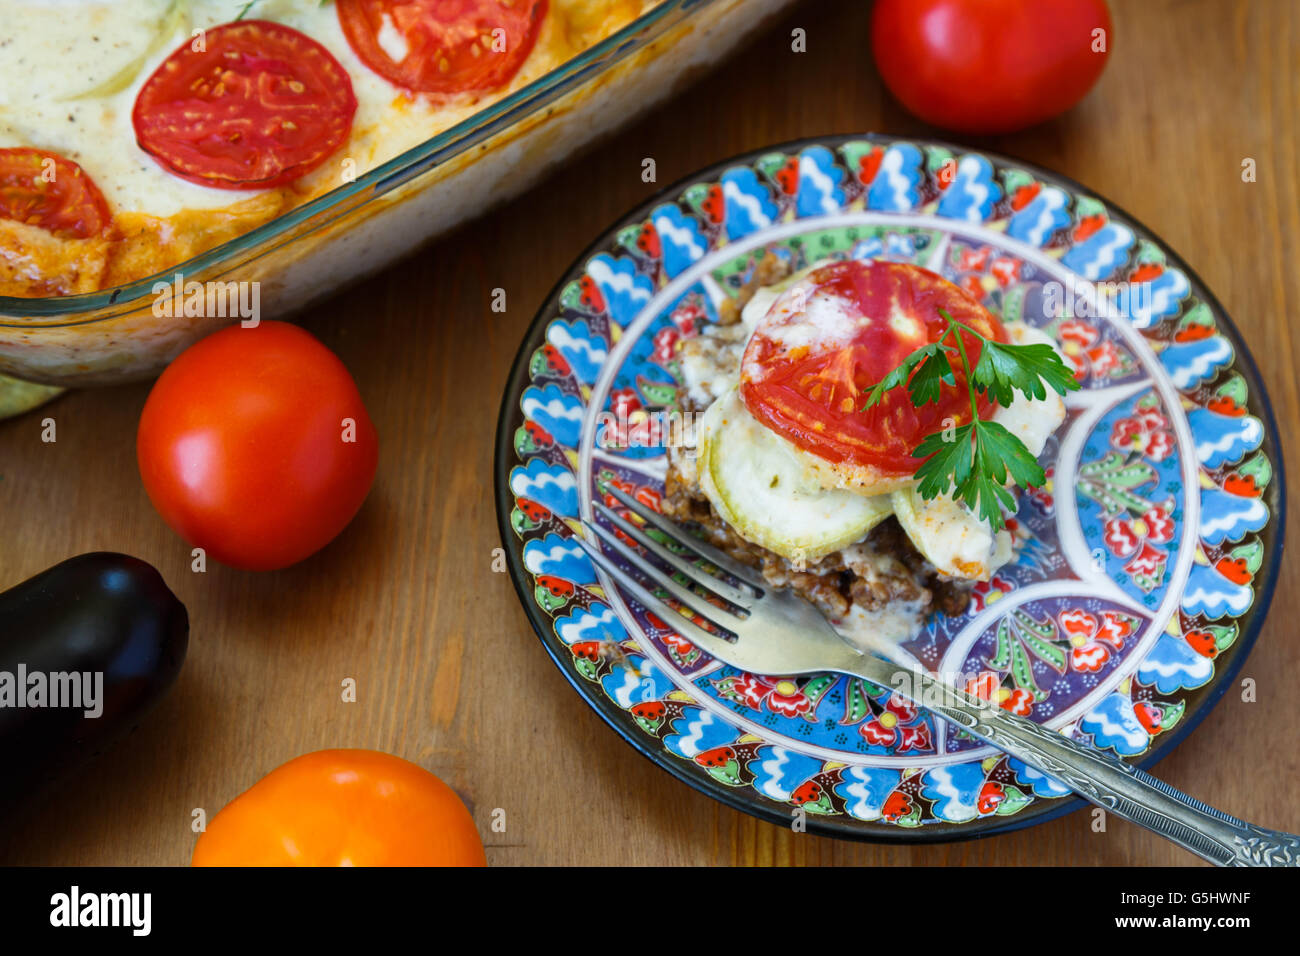 Moussaka on a plate with aubergine and tomato, traditional turkish meal Stock Photo